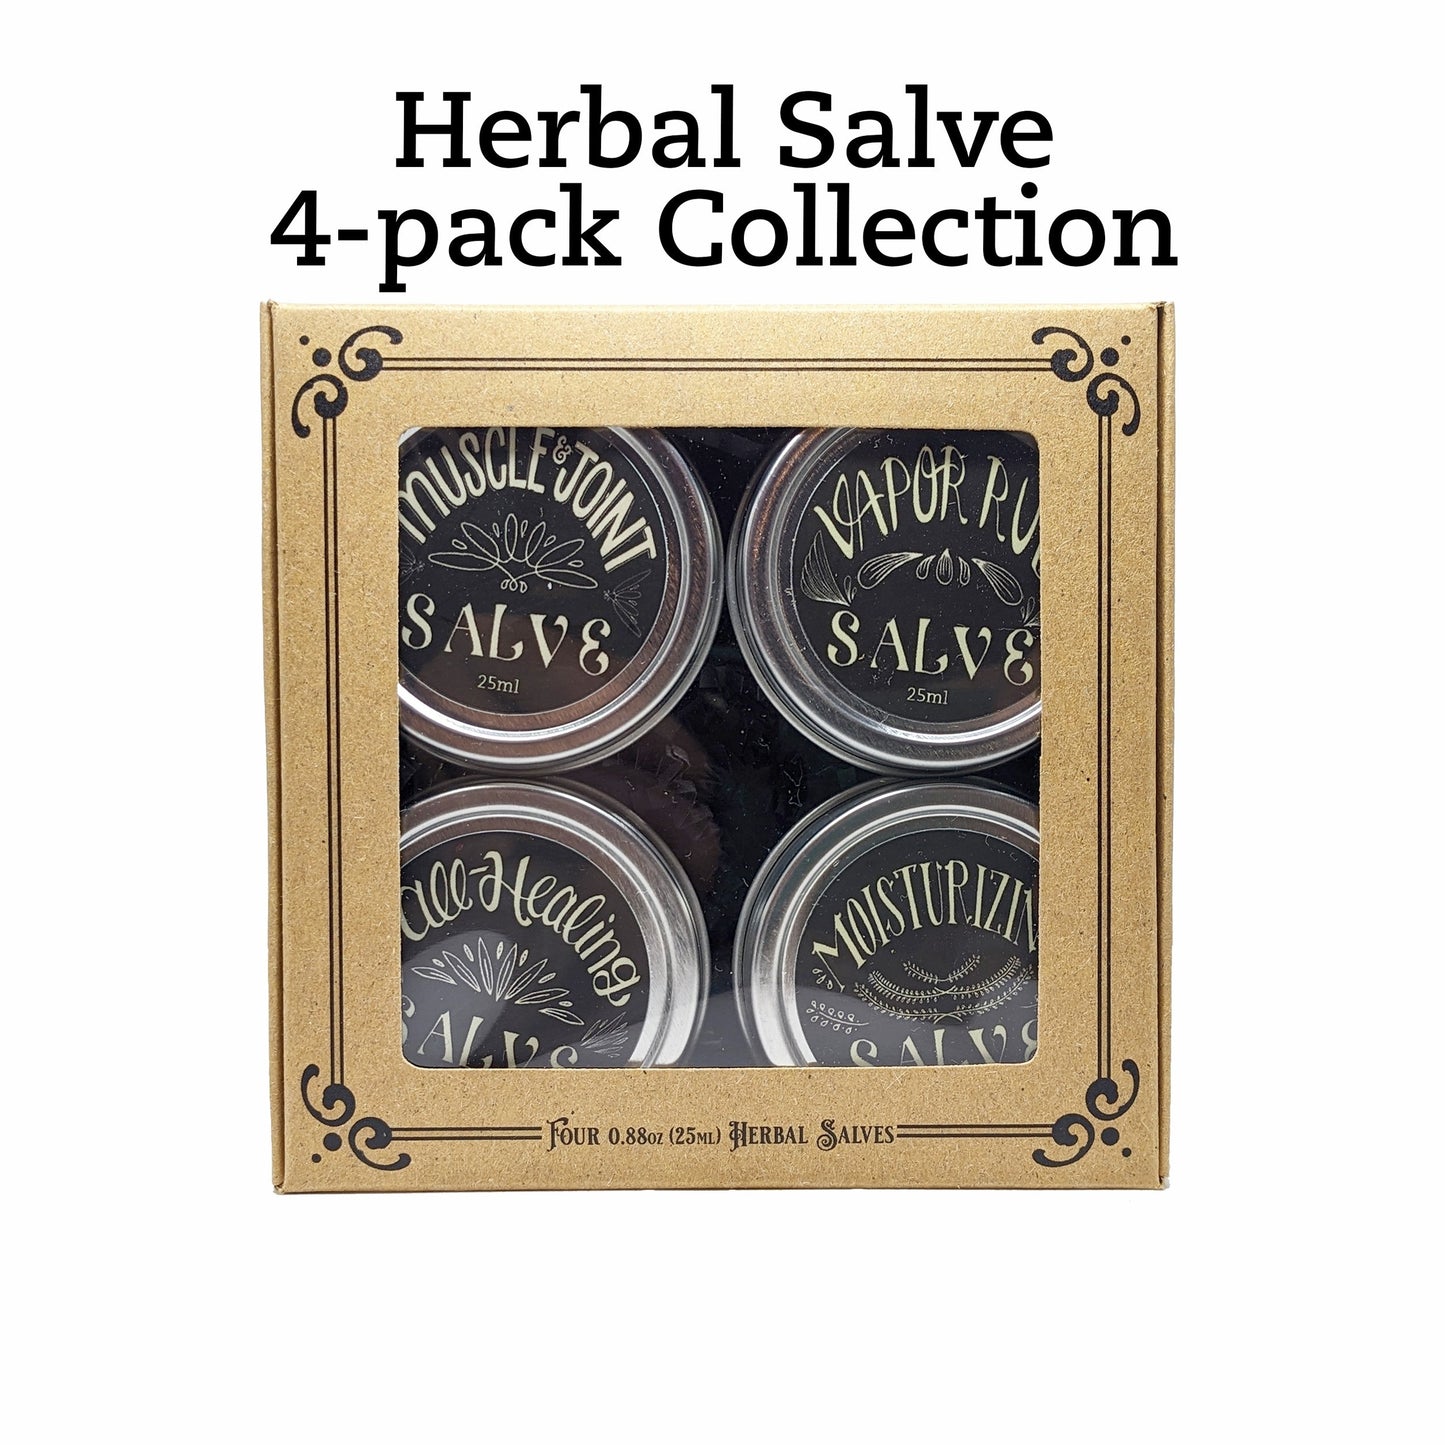 Herbal Salve 4-Pack Collection